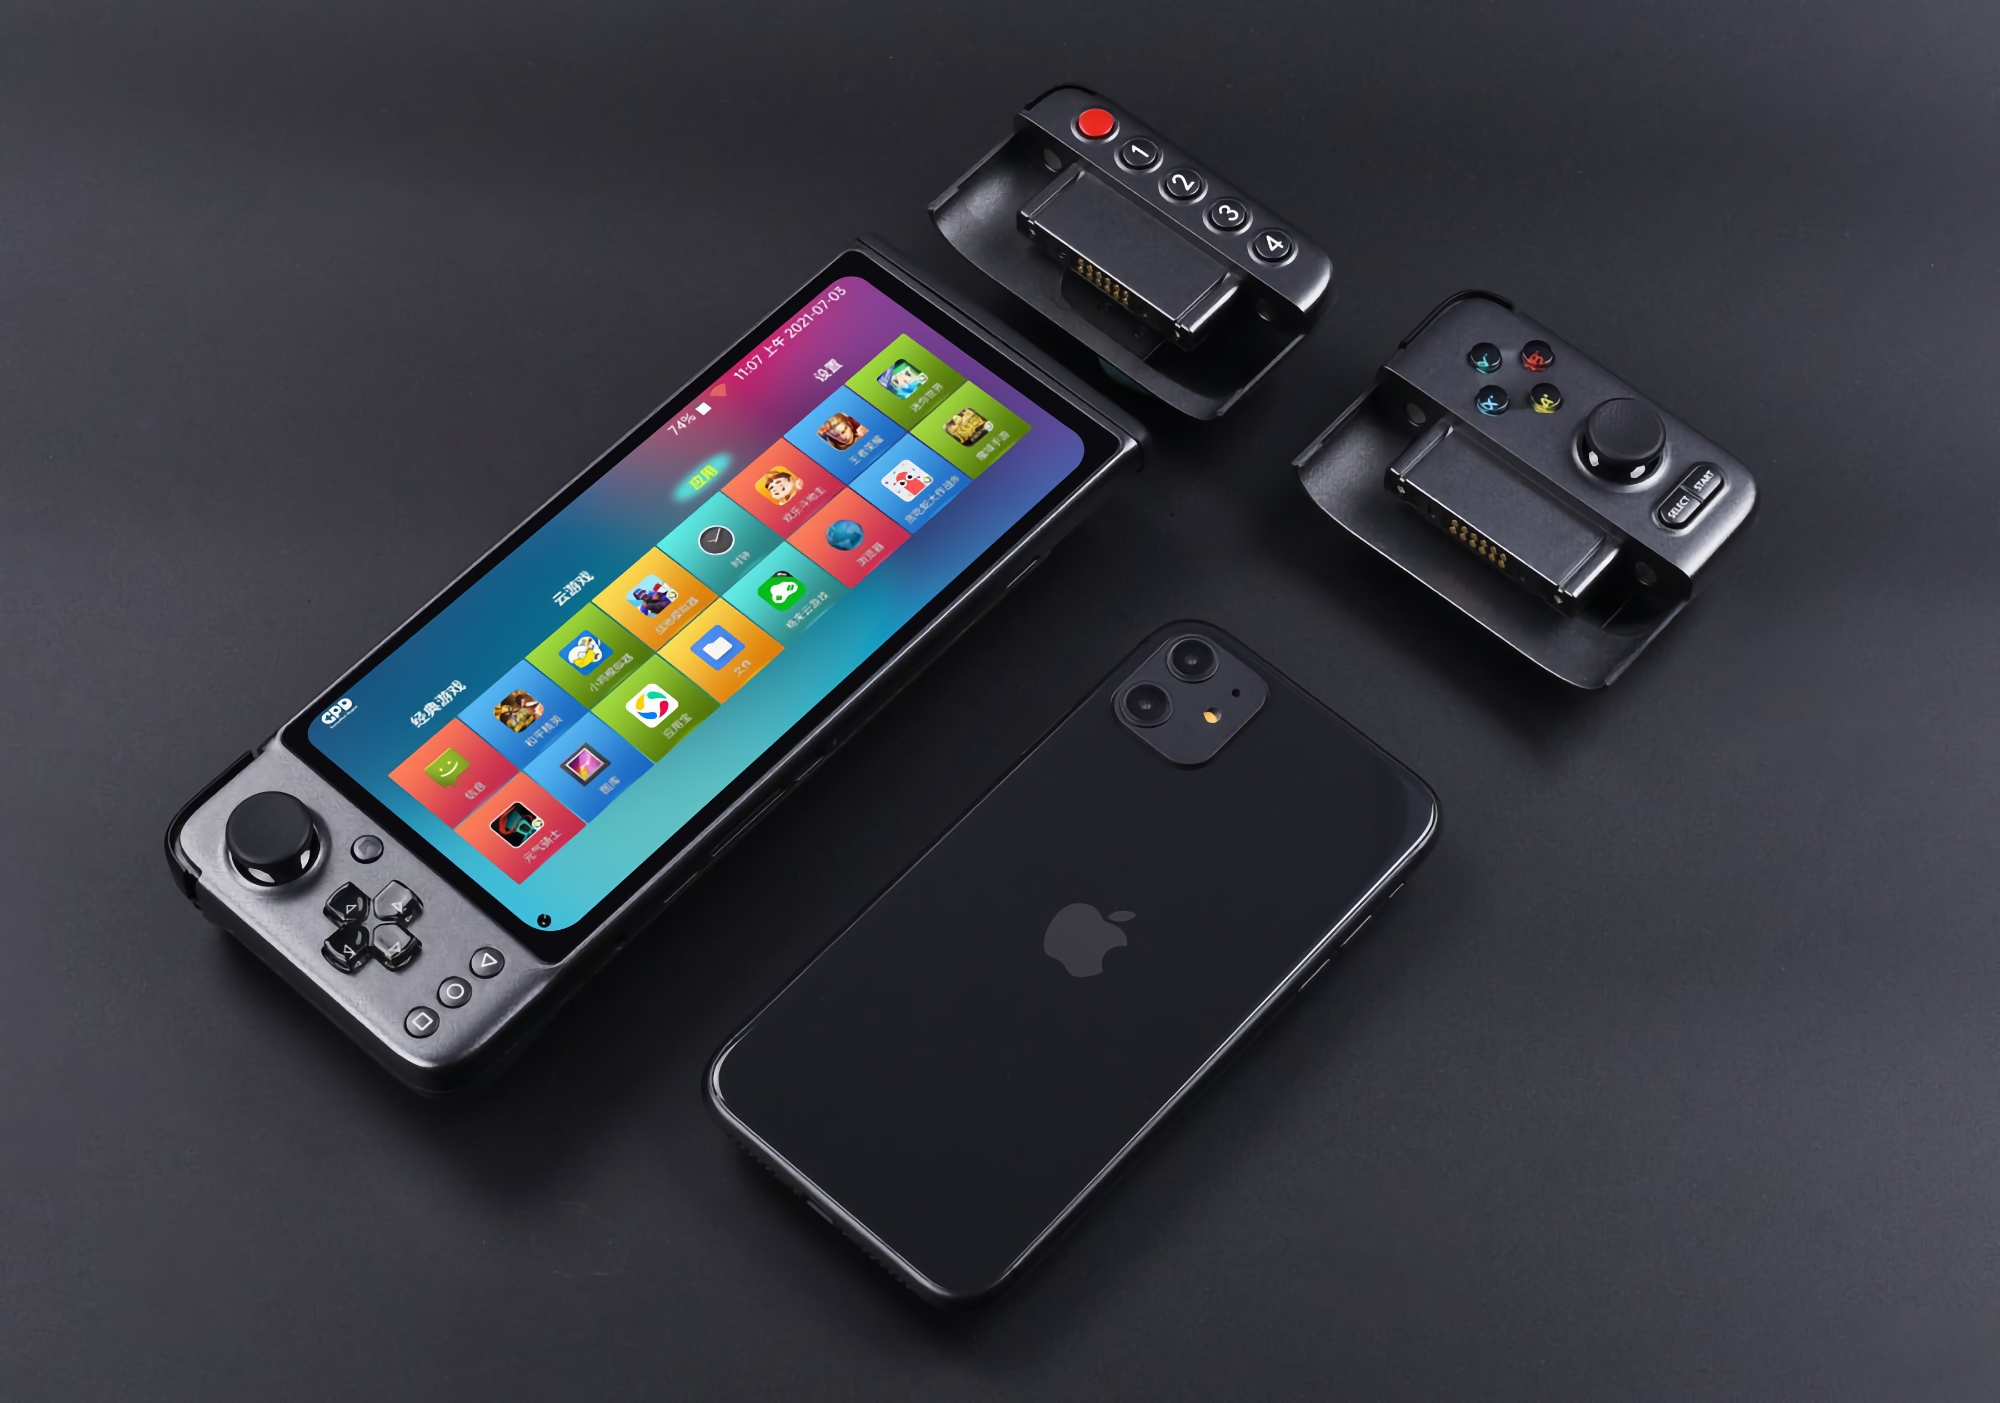 GPD is preparing a modular handheld game console based on the Android operating system